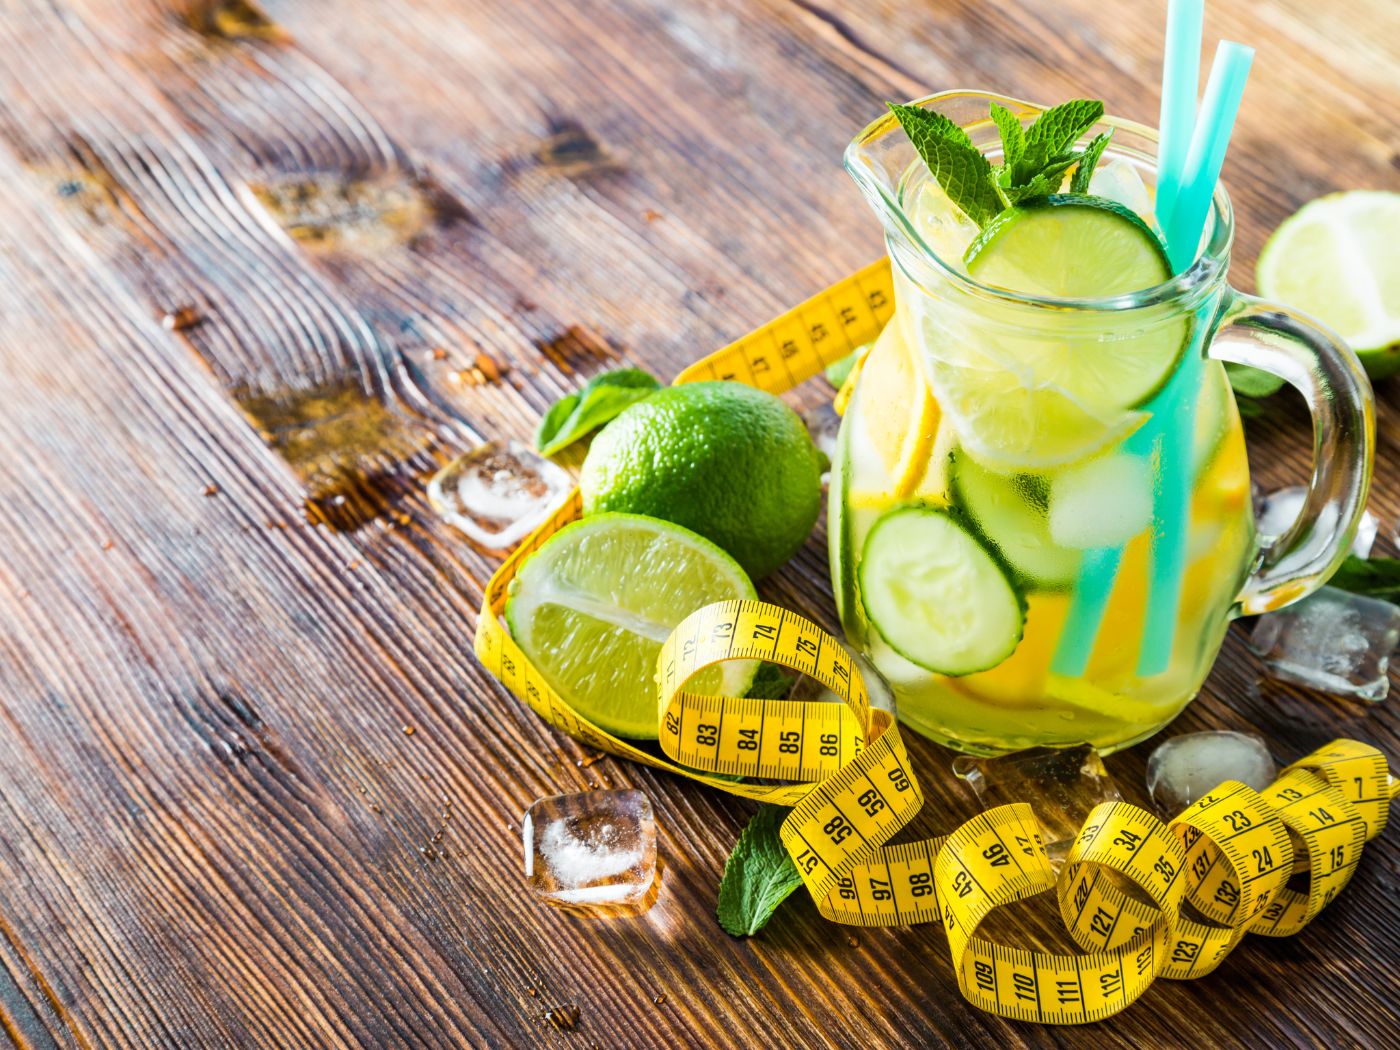 11 Best Healthy Drinks to Lose Weight Easily